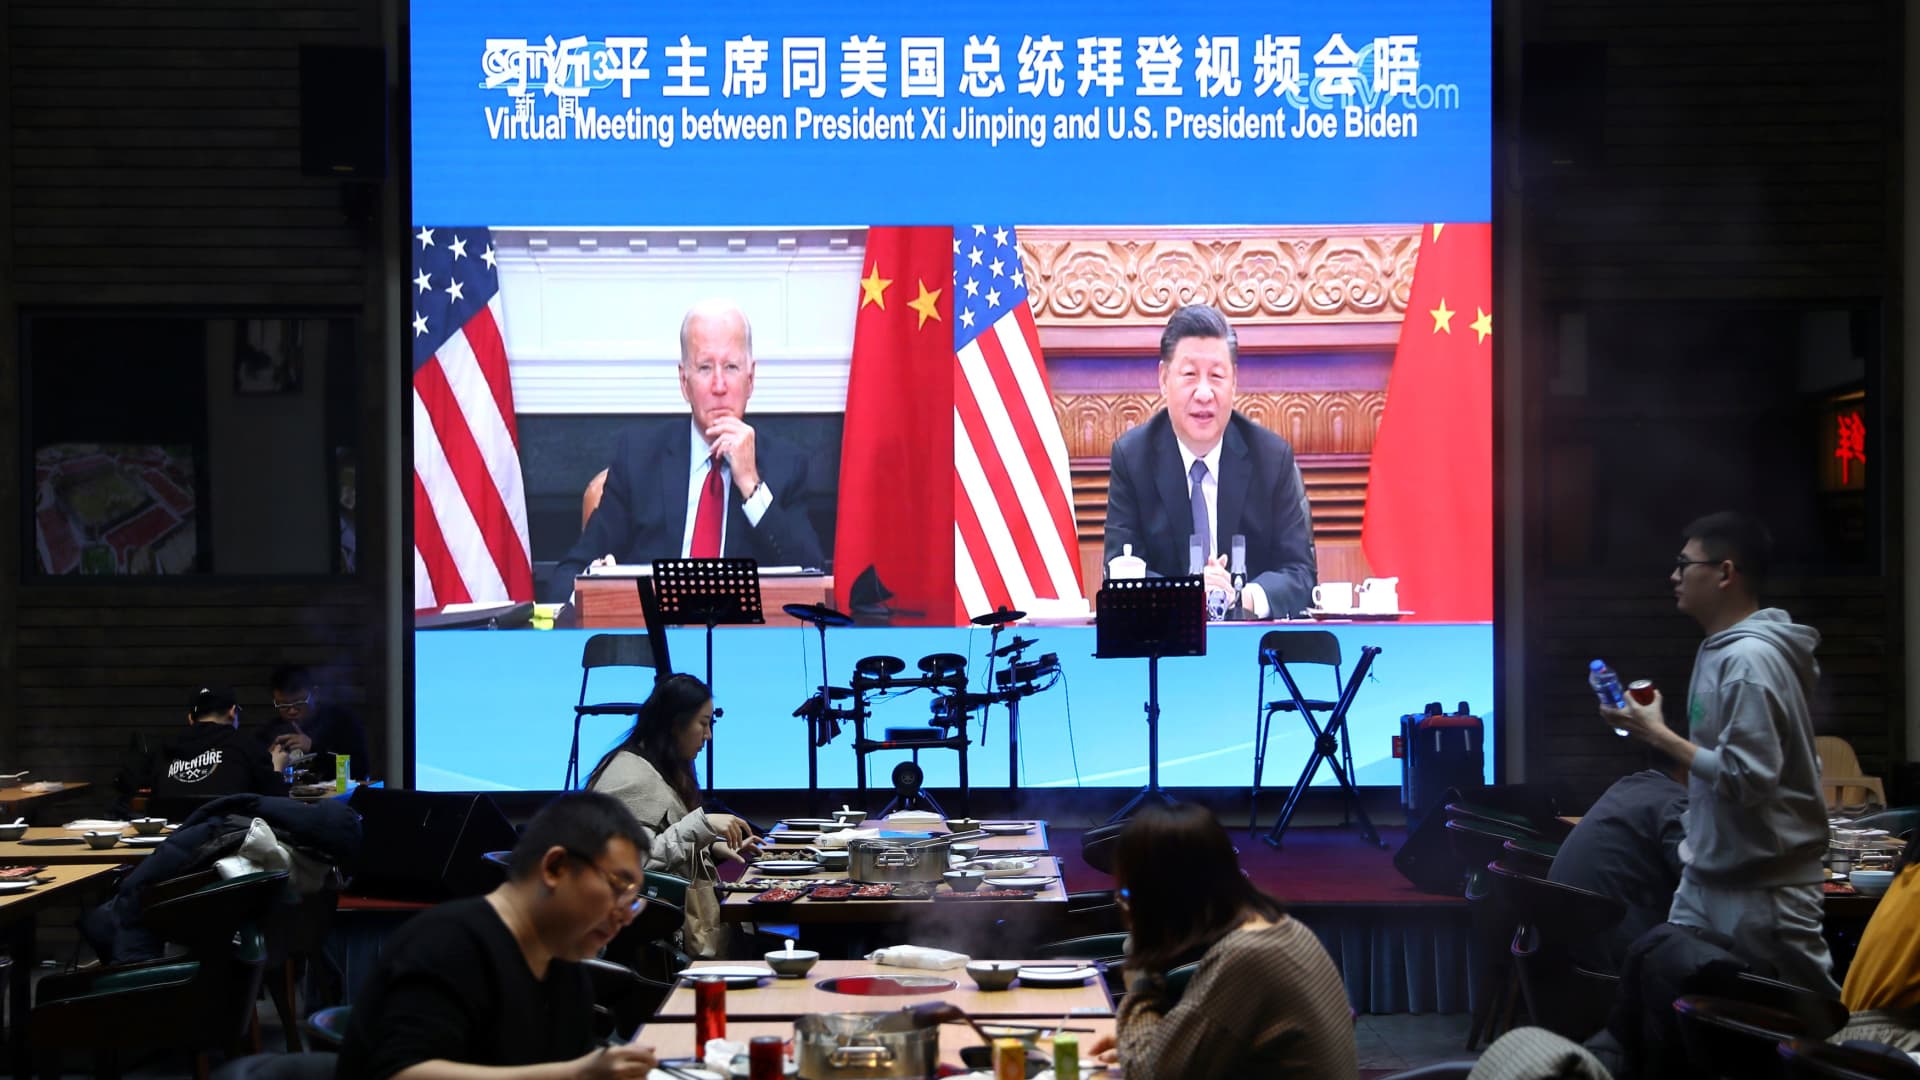 Biden’s call with Xi Jinping will focus on areas of U.S.-China cooperation, not just tension